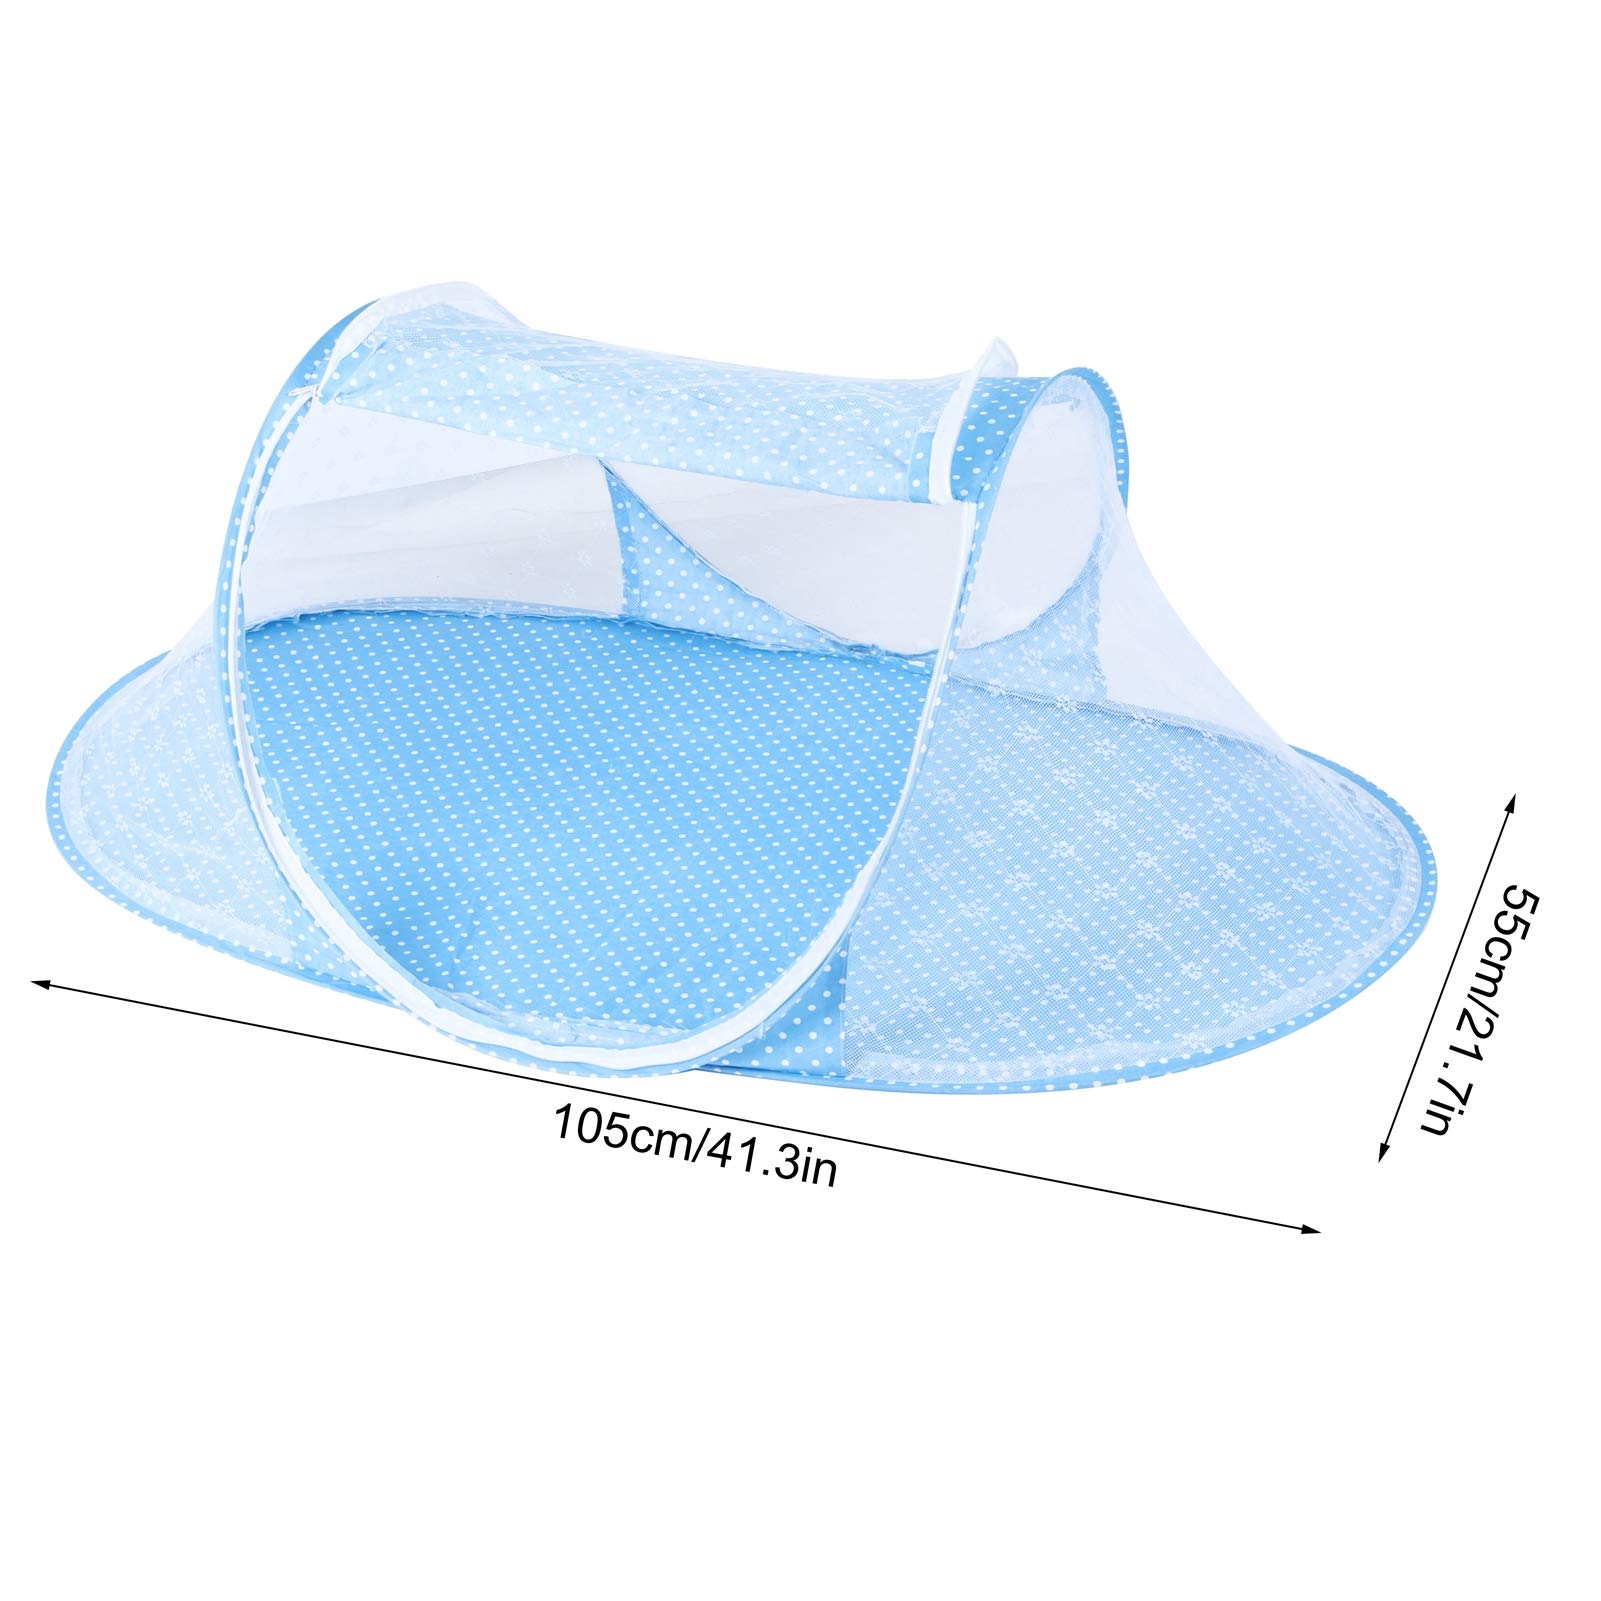 Crib Netting,Baby Bedding Portable Baby Mosquito Net ,Insect Screen, Ultralight, Folding Design for Dining Tables for Children Summer Supplies, Mosquito Net Crib Netting Kid Folding Baby Bedding